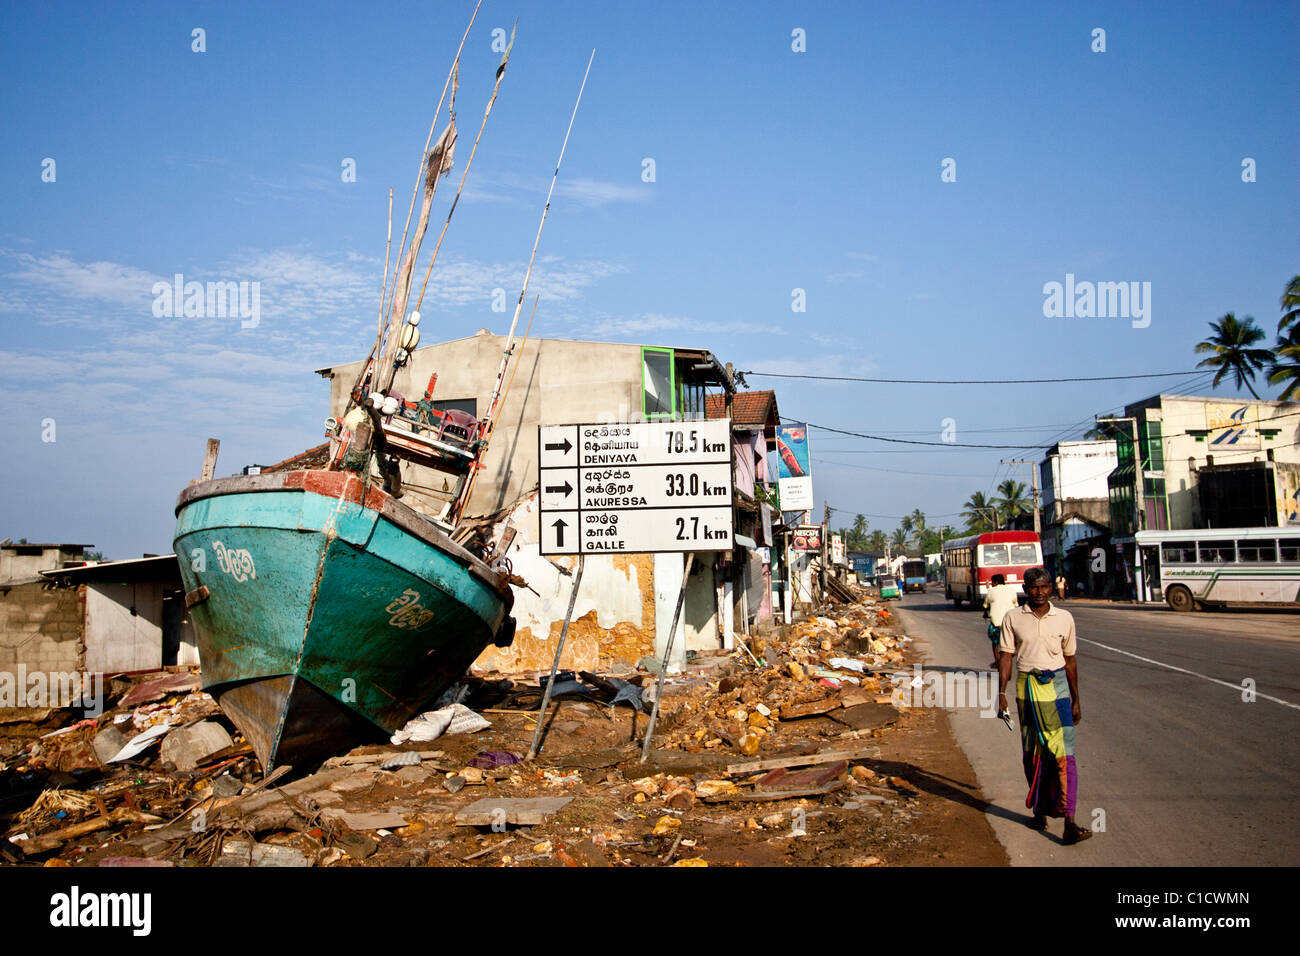 A boat sits where a shop used to, after the Tsunami that hit Sri Lanka in December 2004. Stock Photo